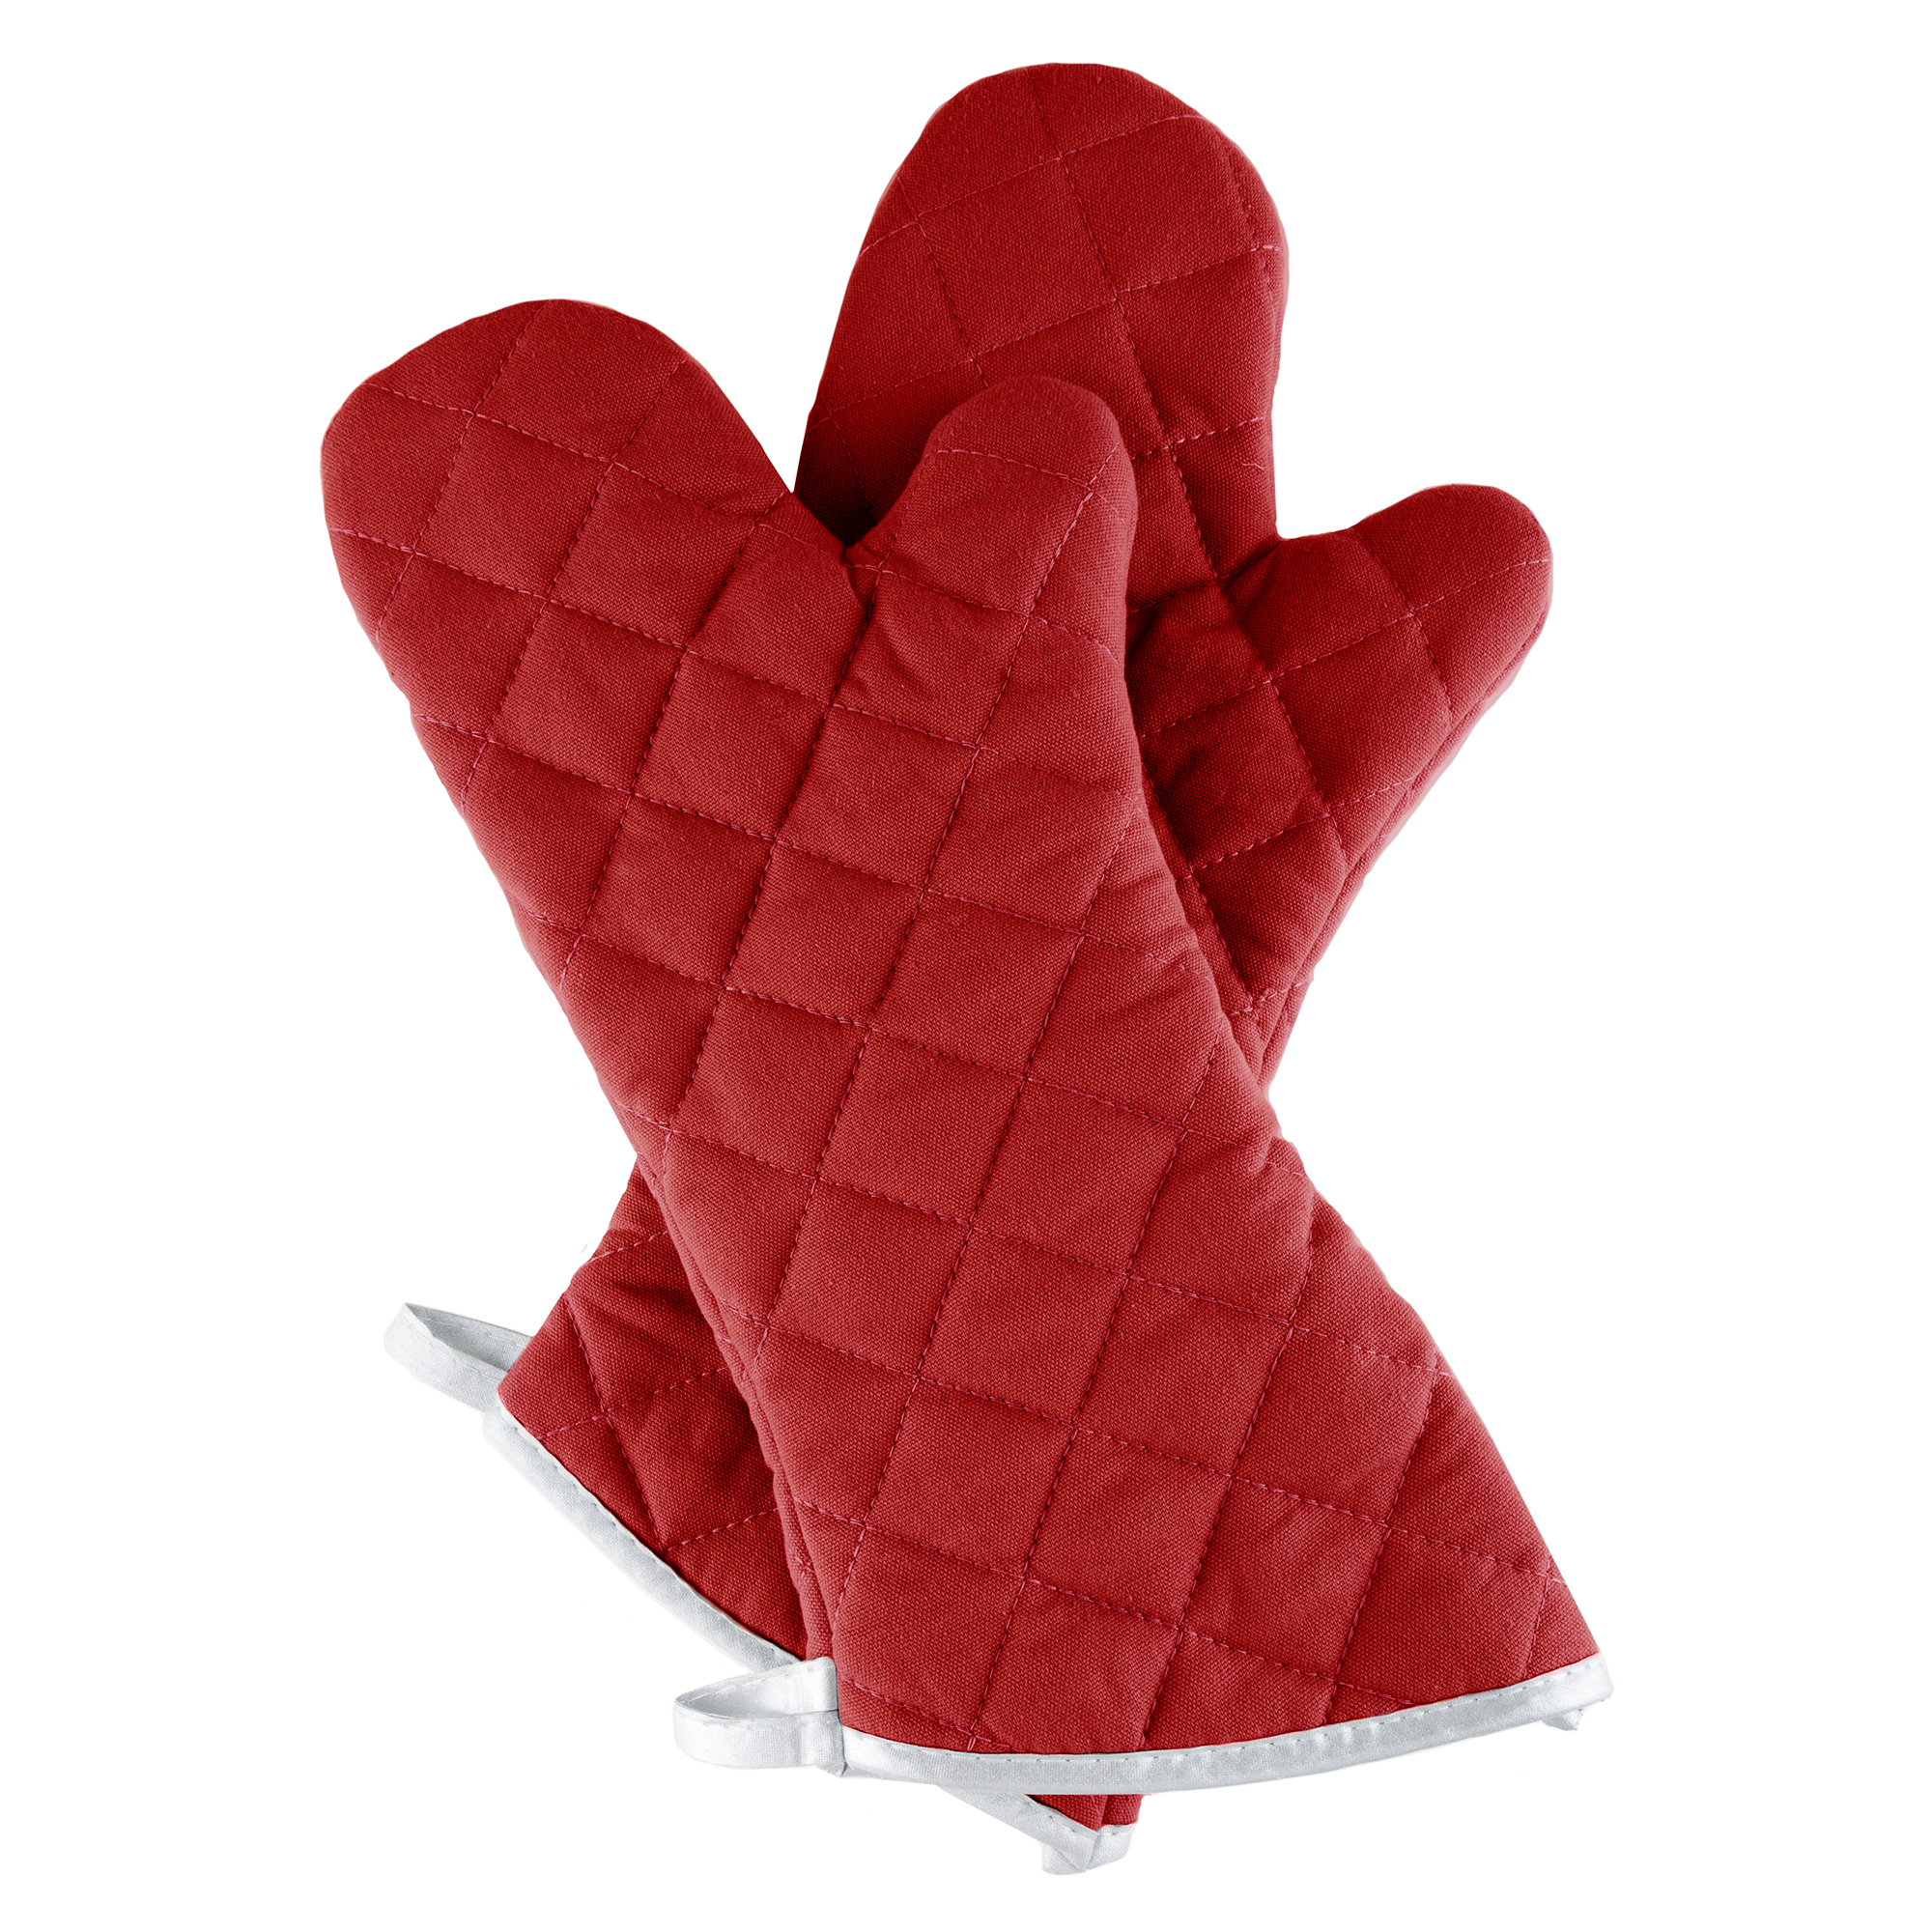 Oven Mitt One Pair Oversized Flame Heat Protection Big Mittens Pot Holders Burgundy